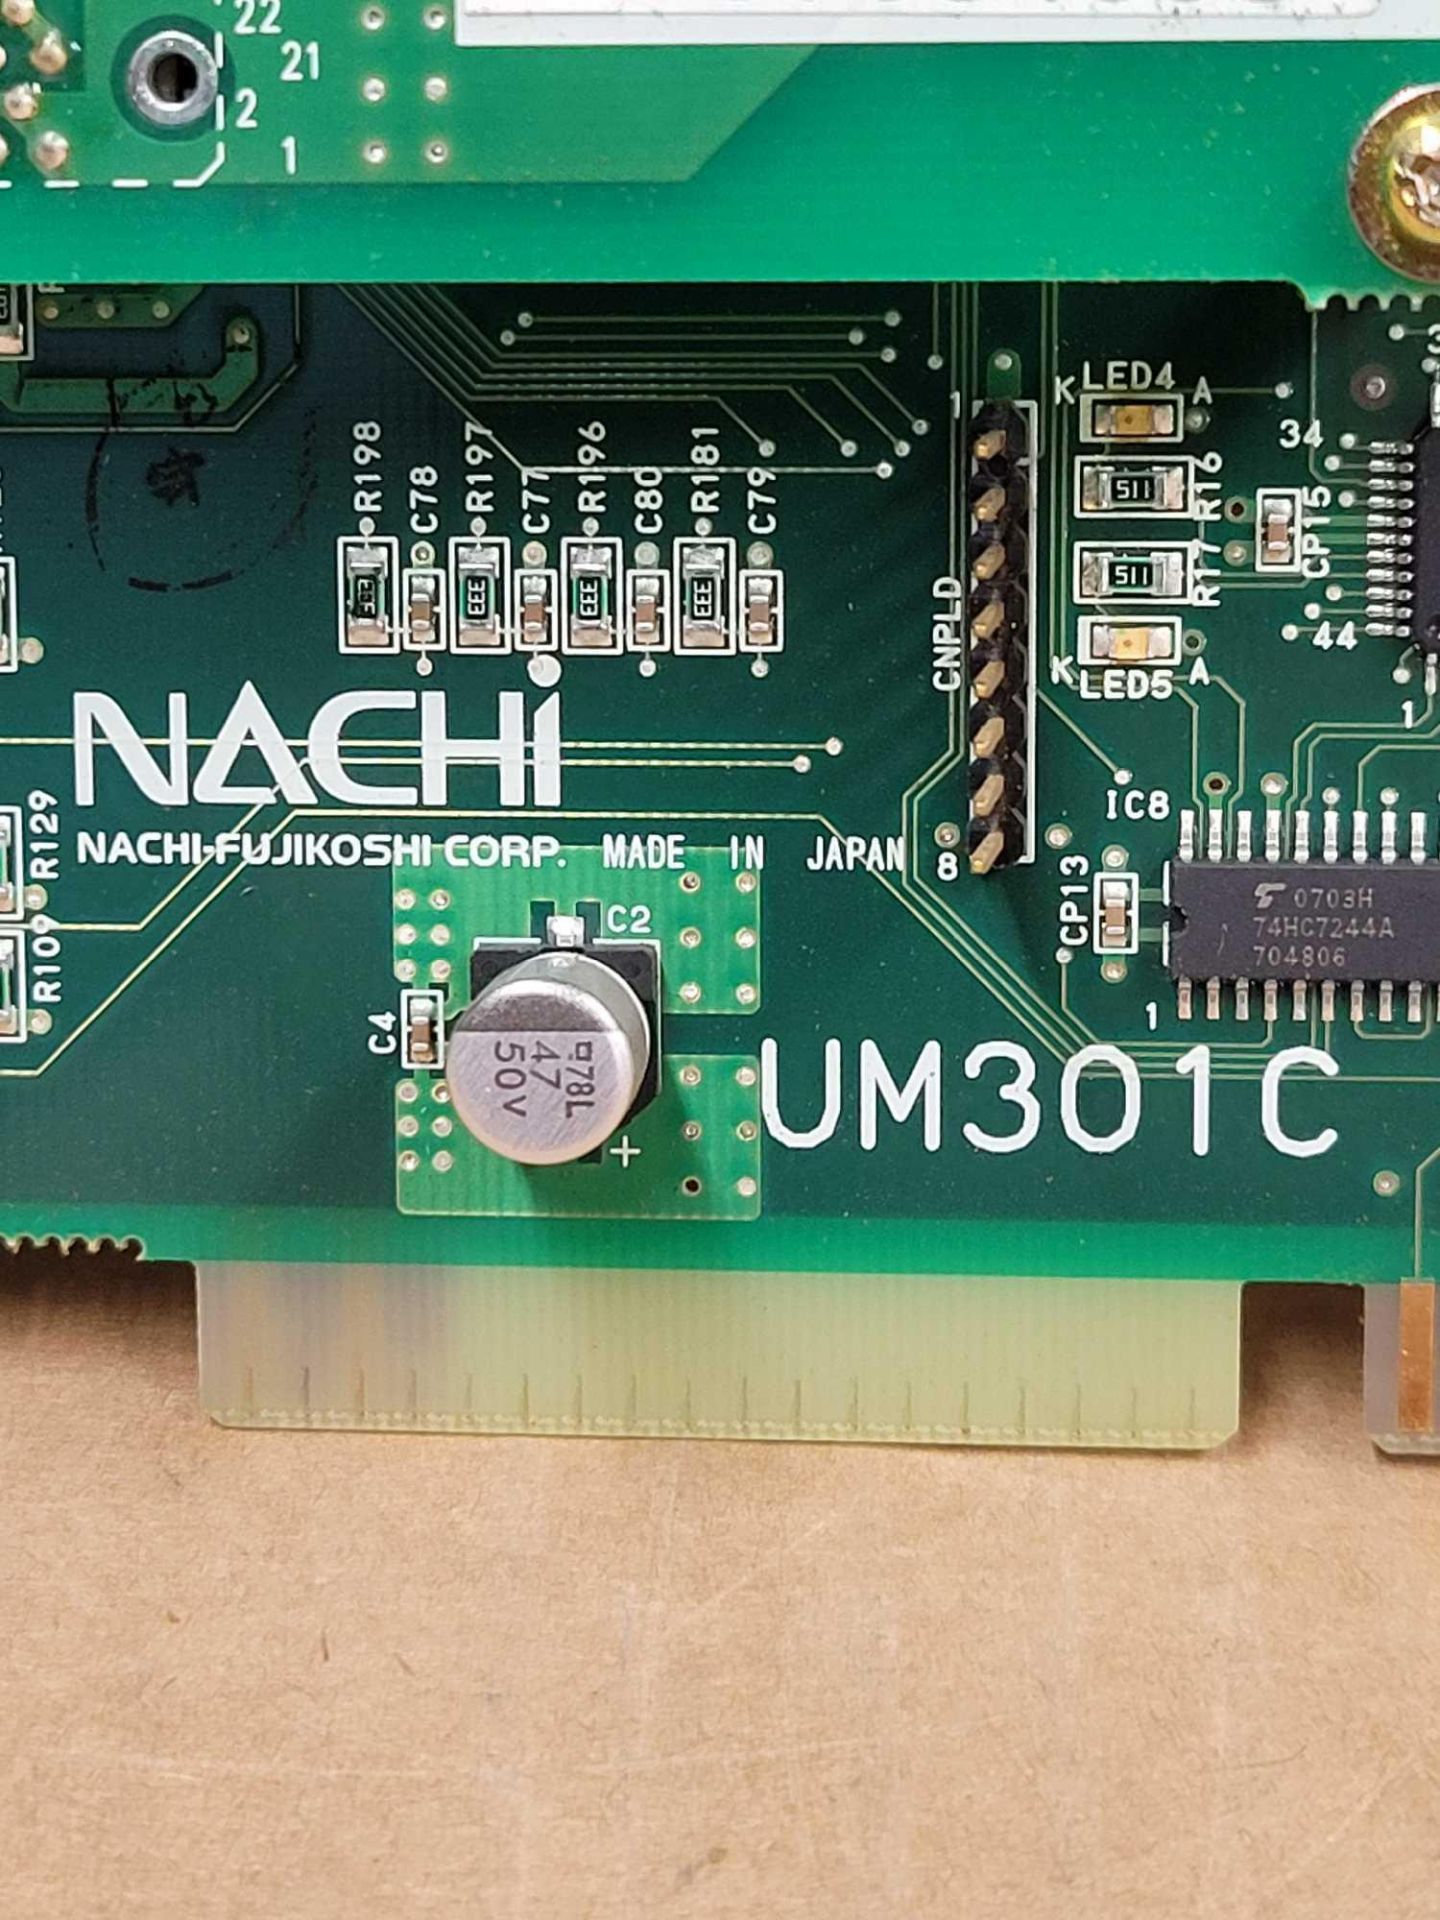 NACHI UM301C with UM326 / PCB Board Card / Lot Weight: 1.2 lbs - Image 4 of 7